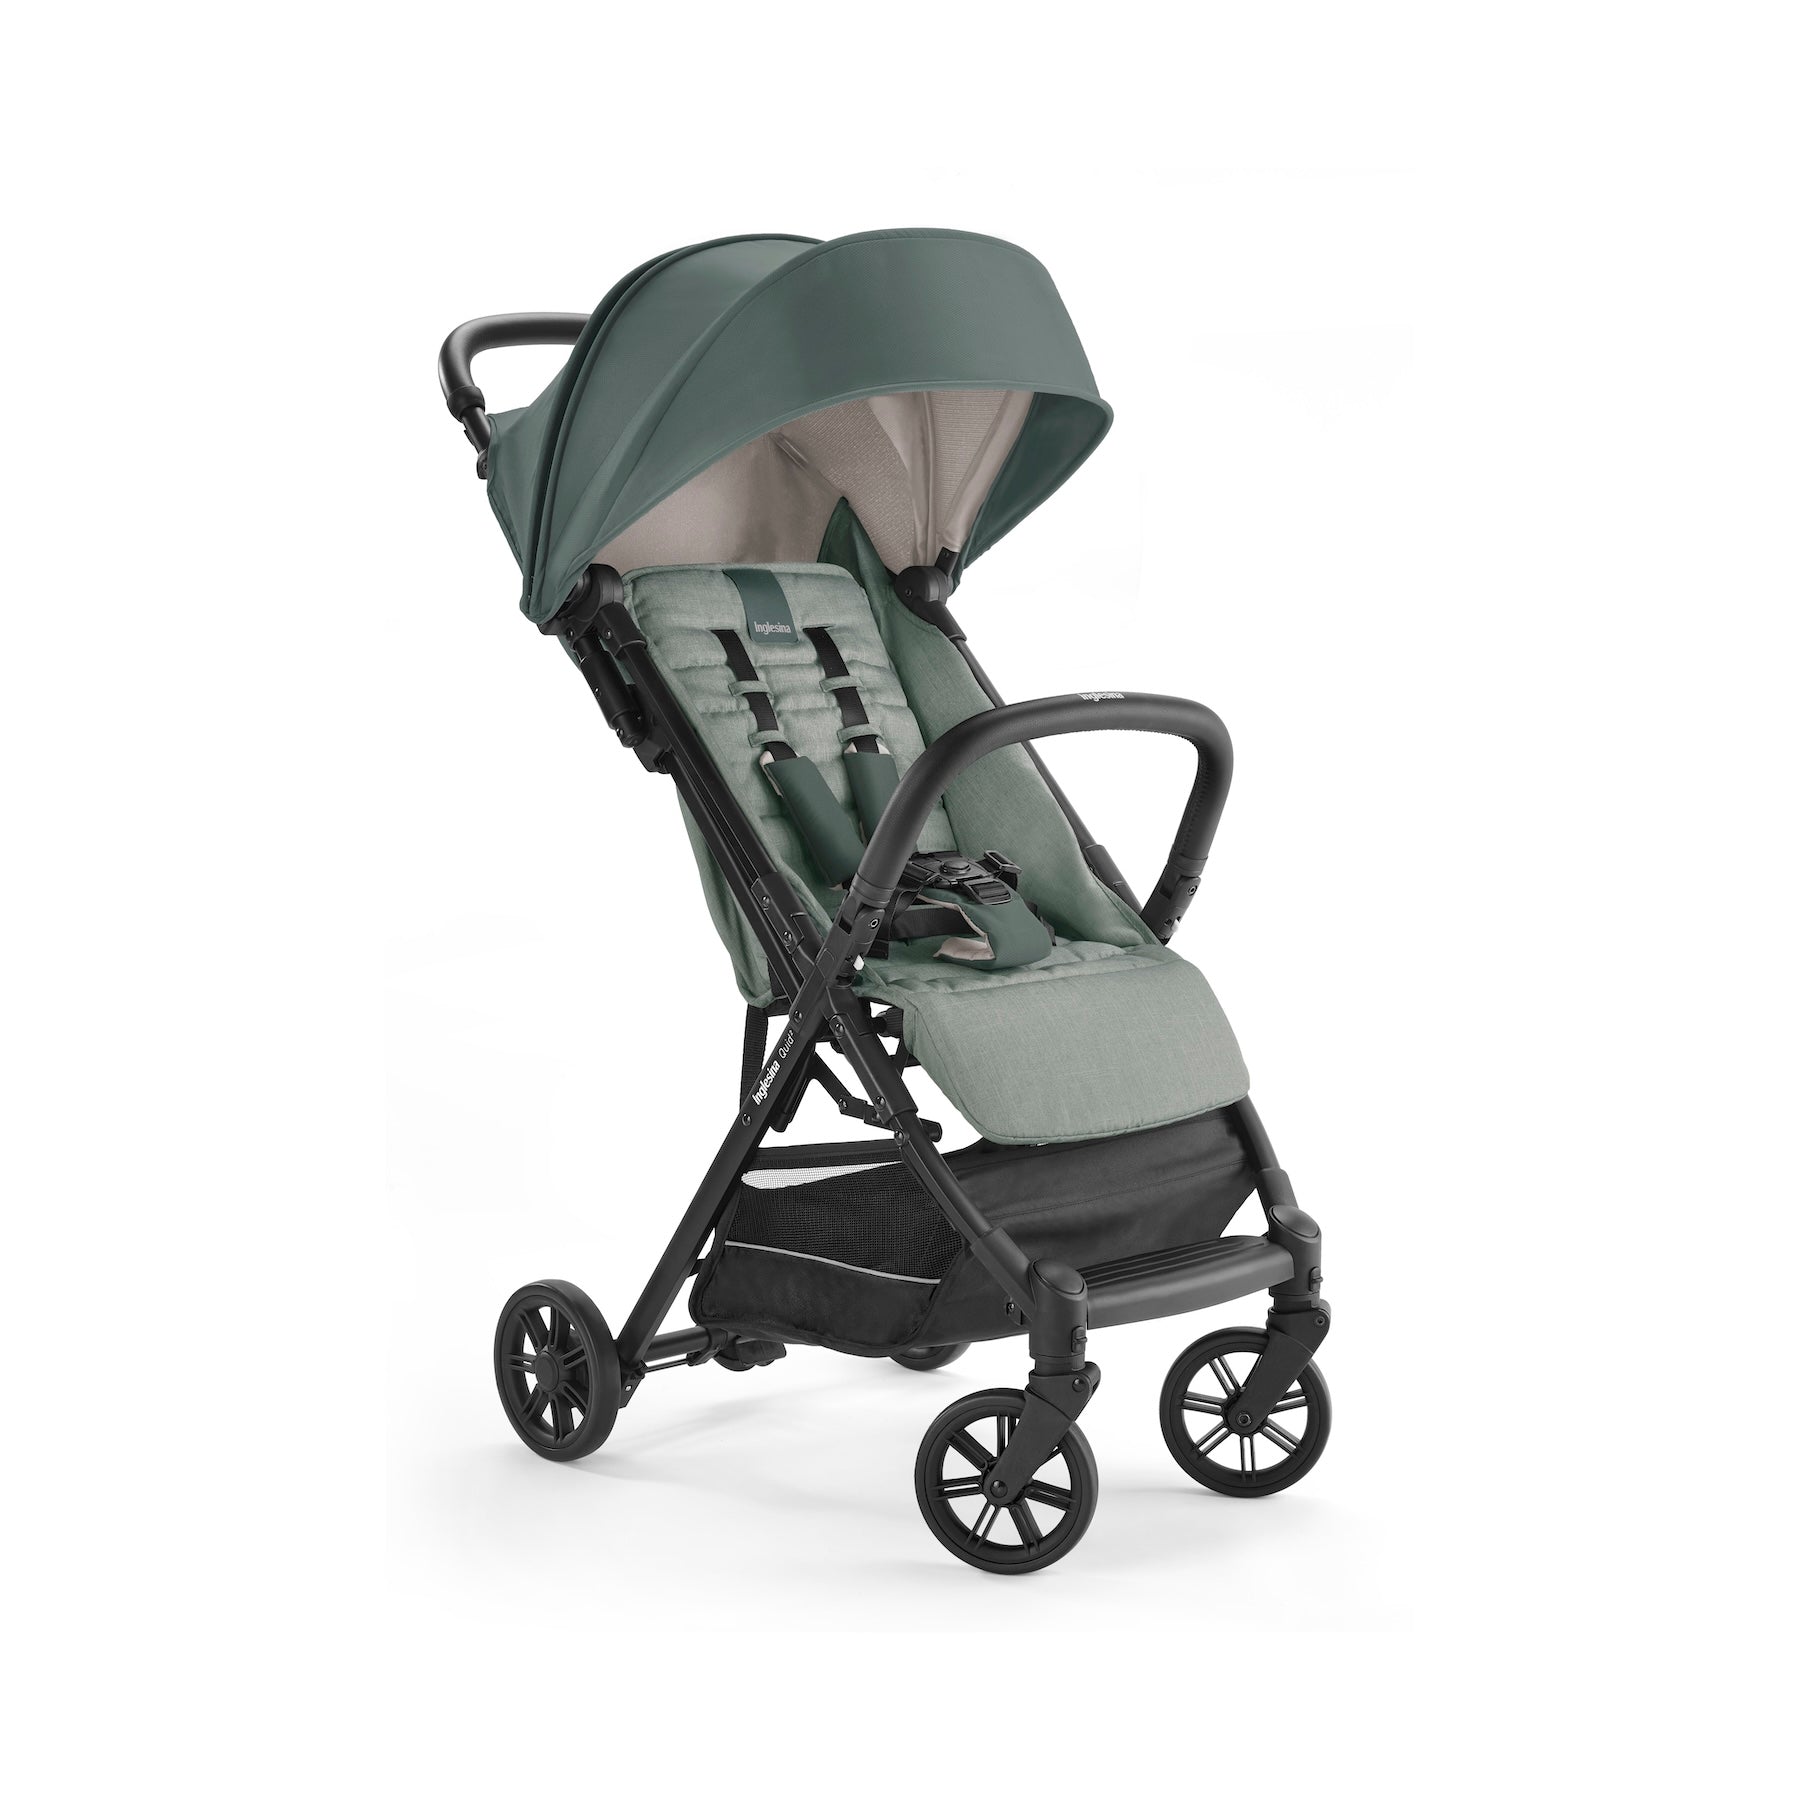 Inglesina Quid Lightweight, Foldable & Compact Baby Stroller - ANB Baby -809630009267$100 - $300